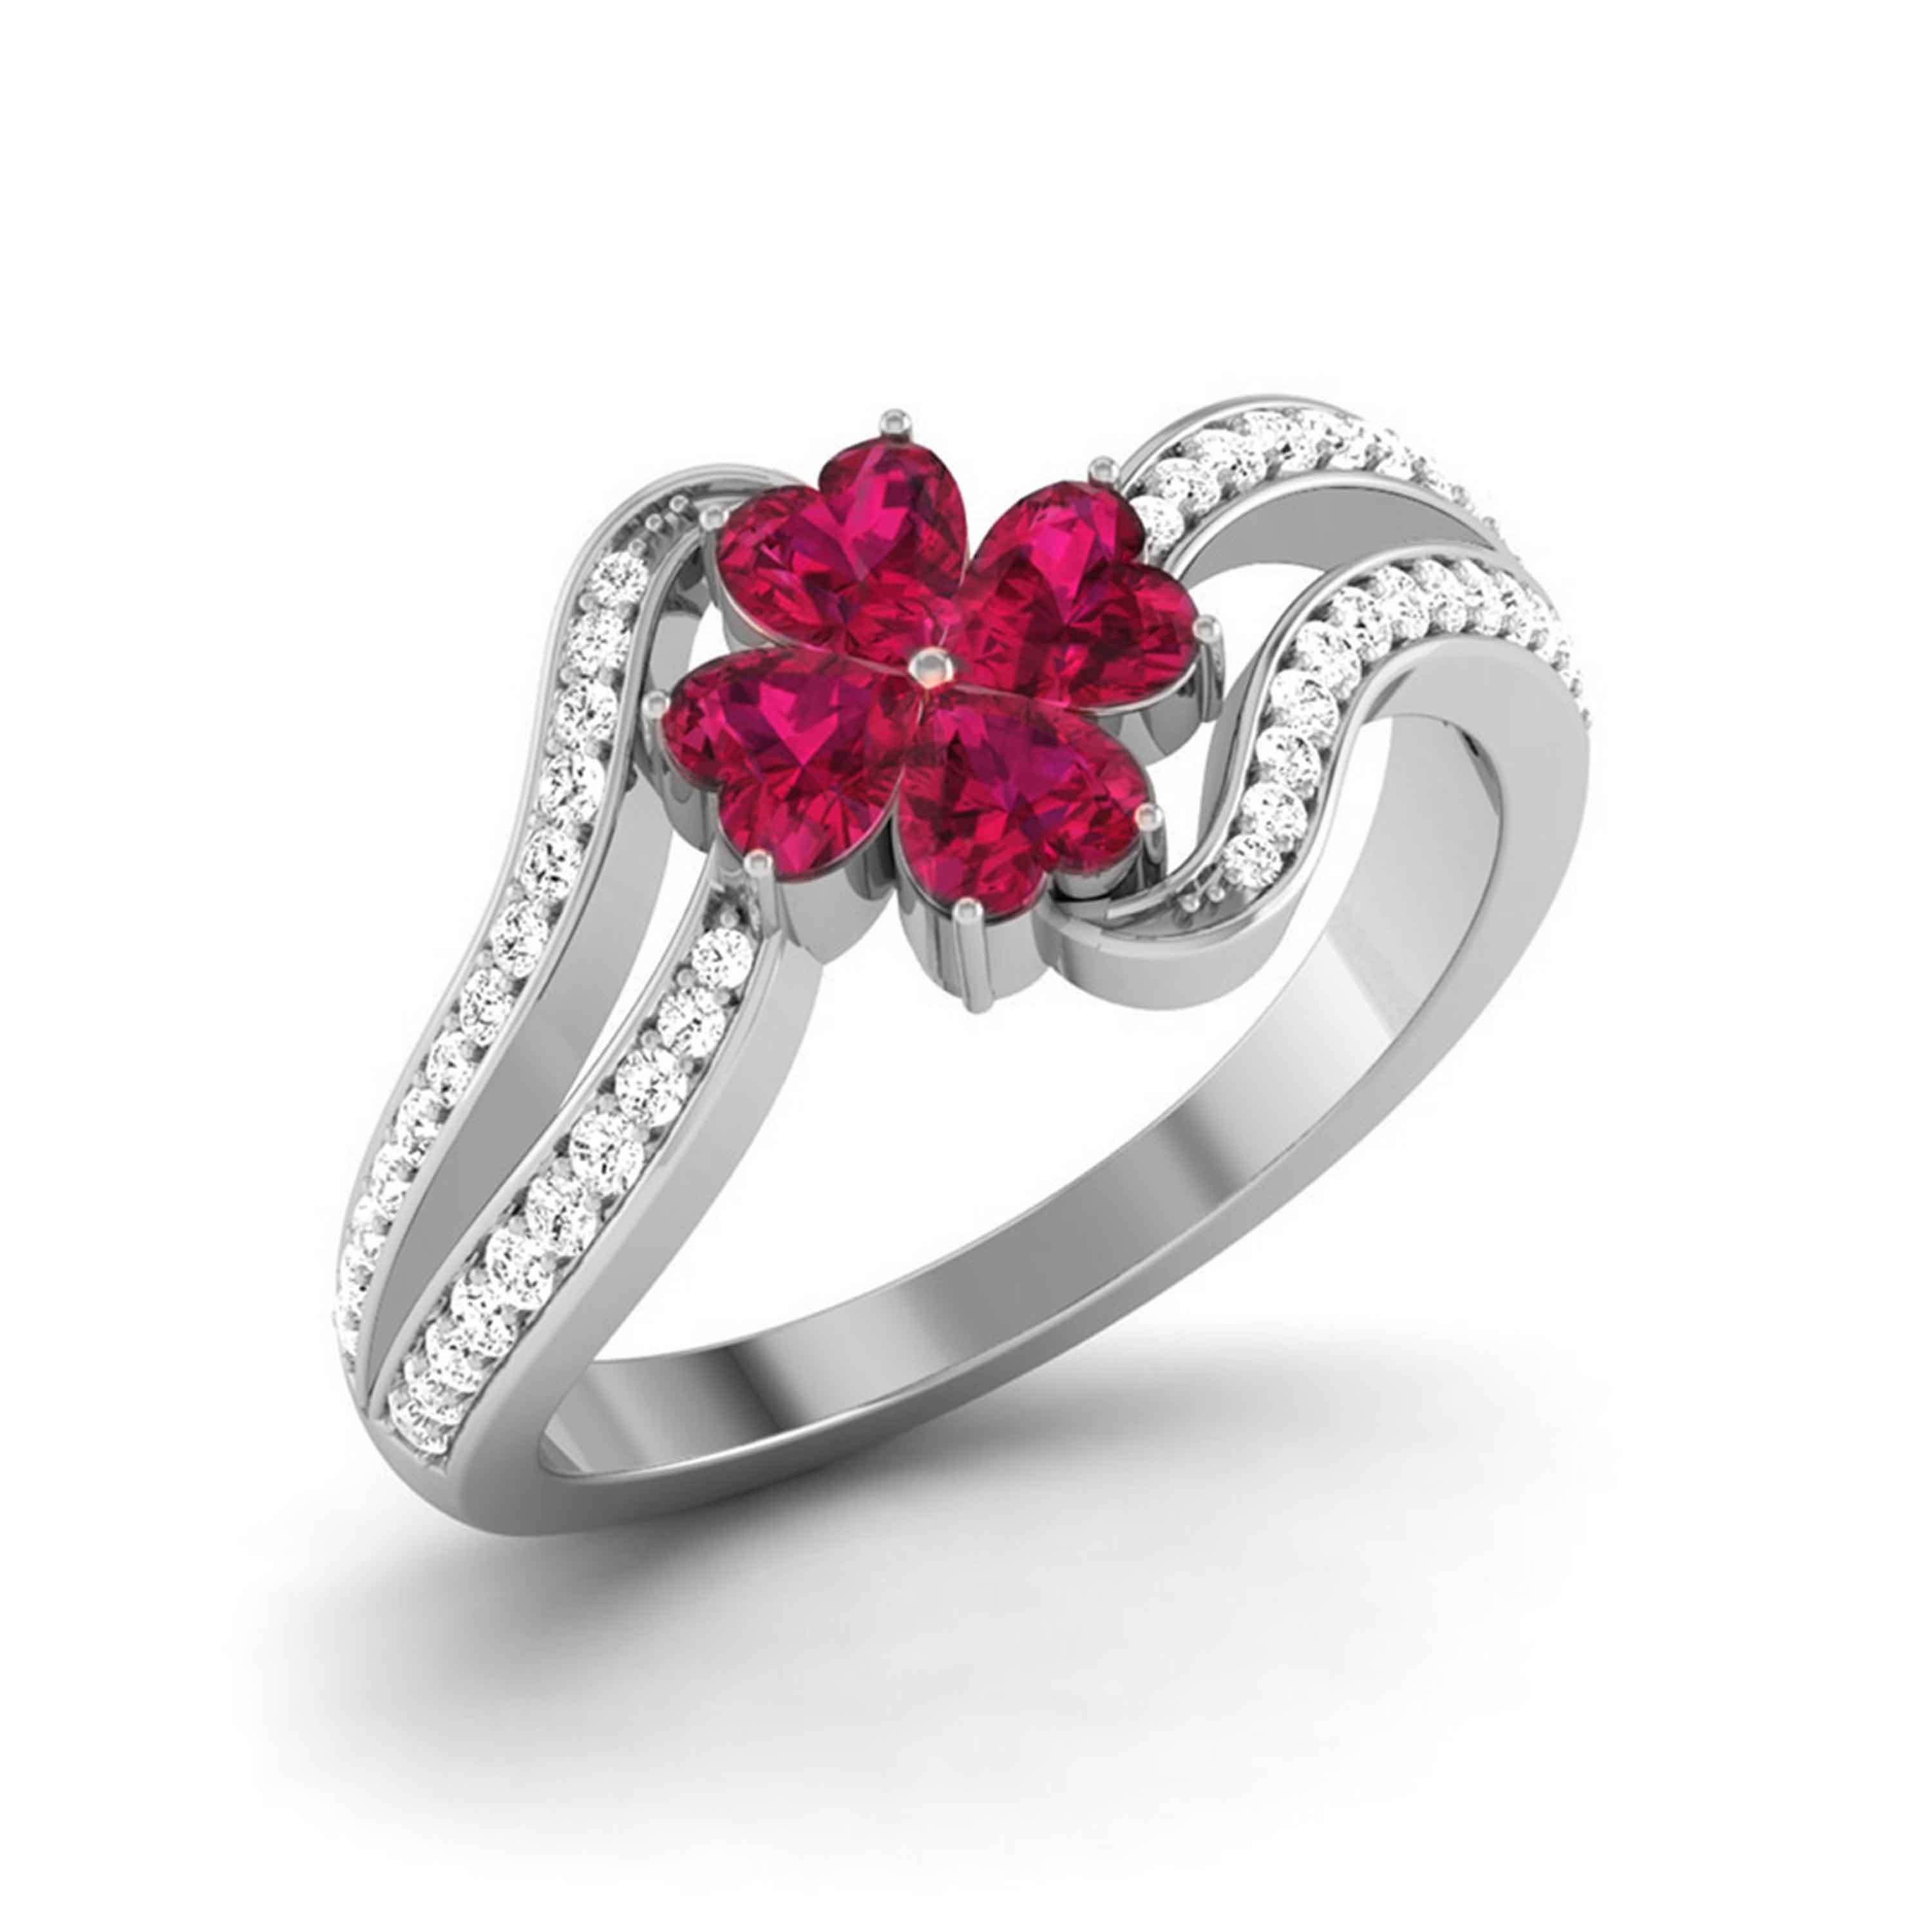 Aahi Oval Ruby Rings - Buy Finest Indian Imitation Fashion Jewellery At  Best Price.